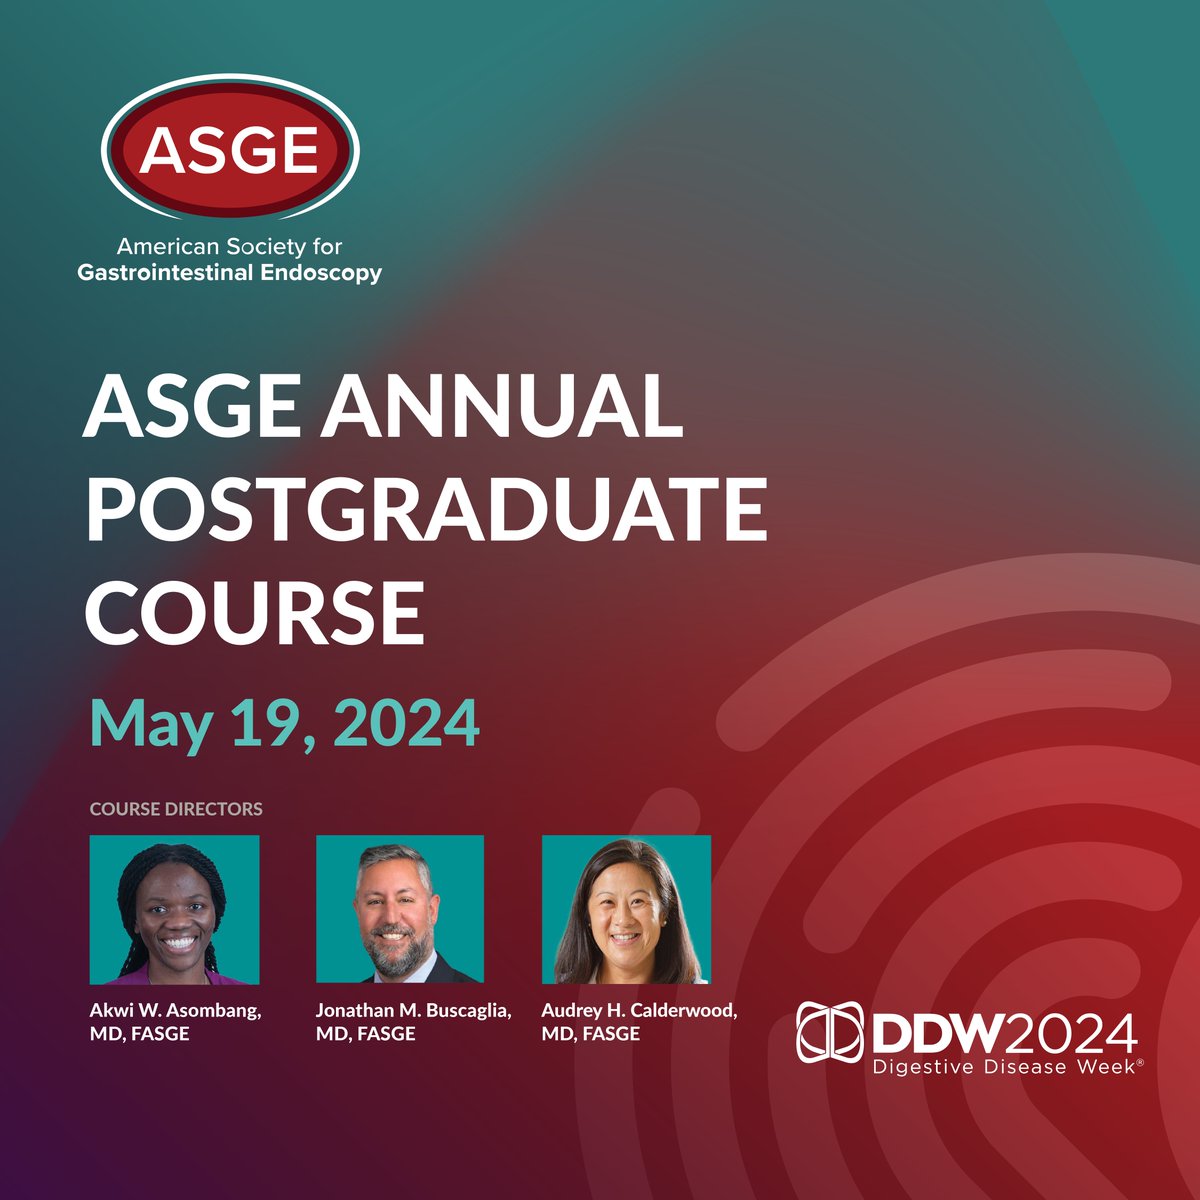 Enhance your #DDW2024 experience with ASGE's Annual Postgraduate Course on May 19! Course Directors @AkwiAsombangMD, @JonathanBuscag1 and @AudreyGIdoc take the lead with topics of digestive health in LGBTQIA+ patients and endoscopy in pregnancy. Sign up at hubs.ly/Q02rmxlg0